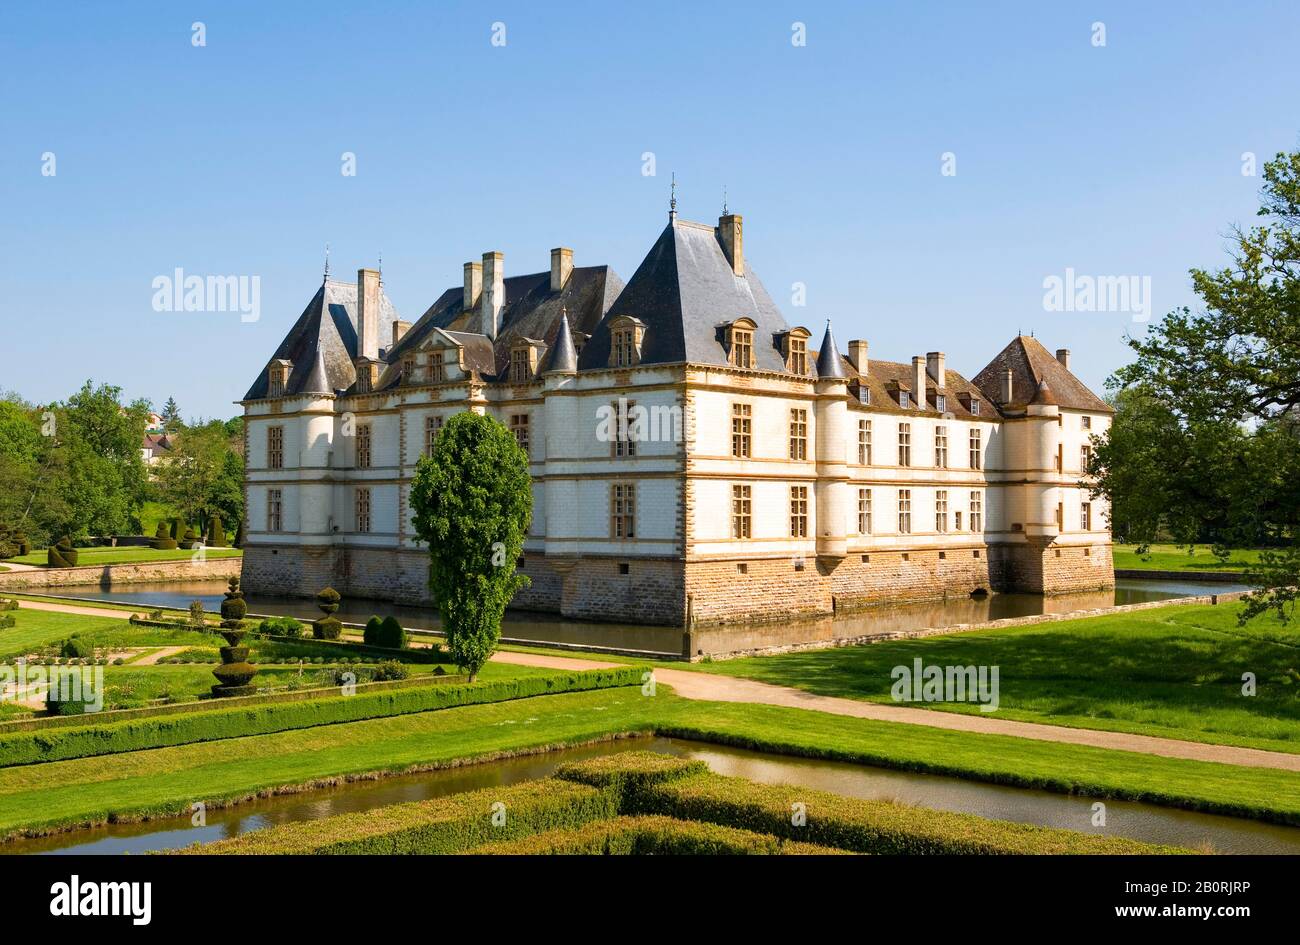 Moated castle, Castle of Cormatin, Cormatin, Department Saone et Loire, Burgundy, France Stock Photo